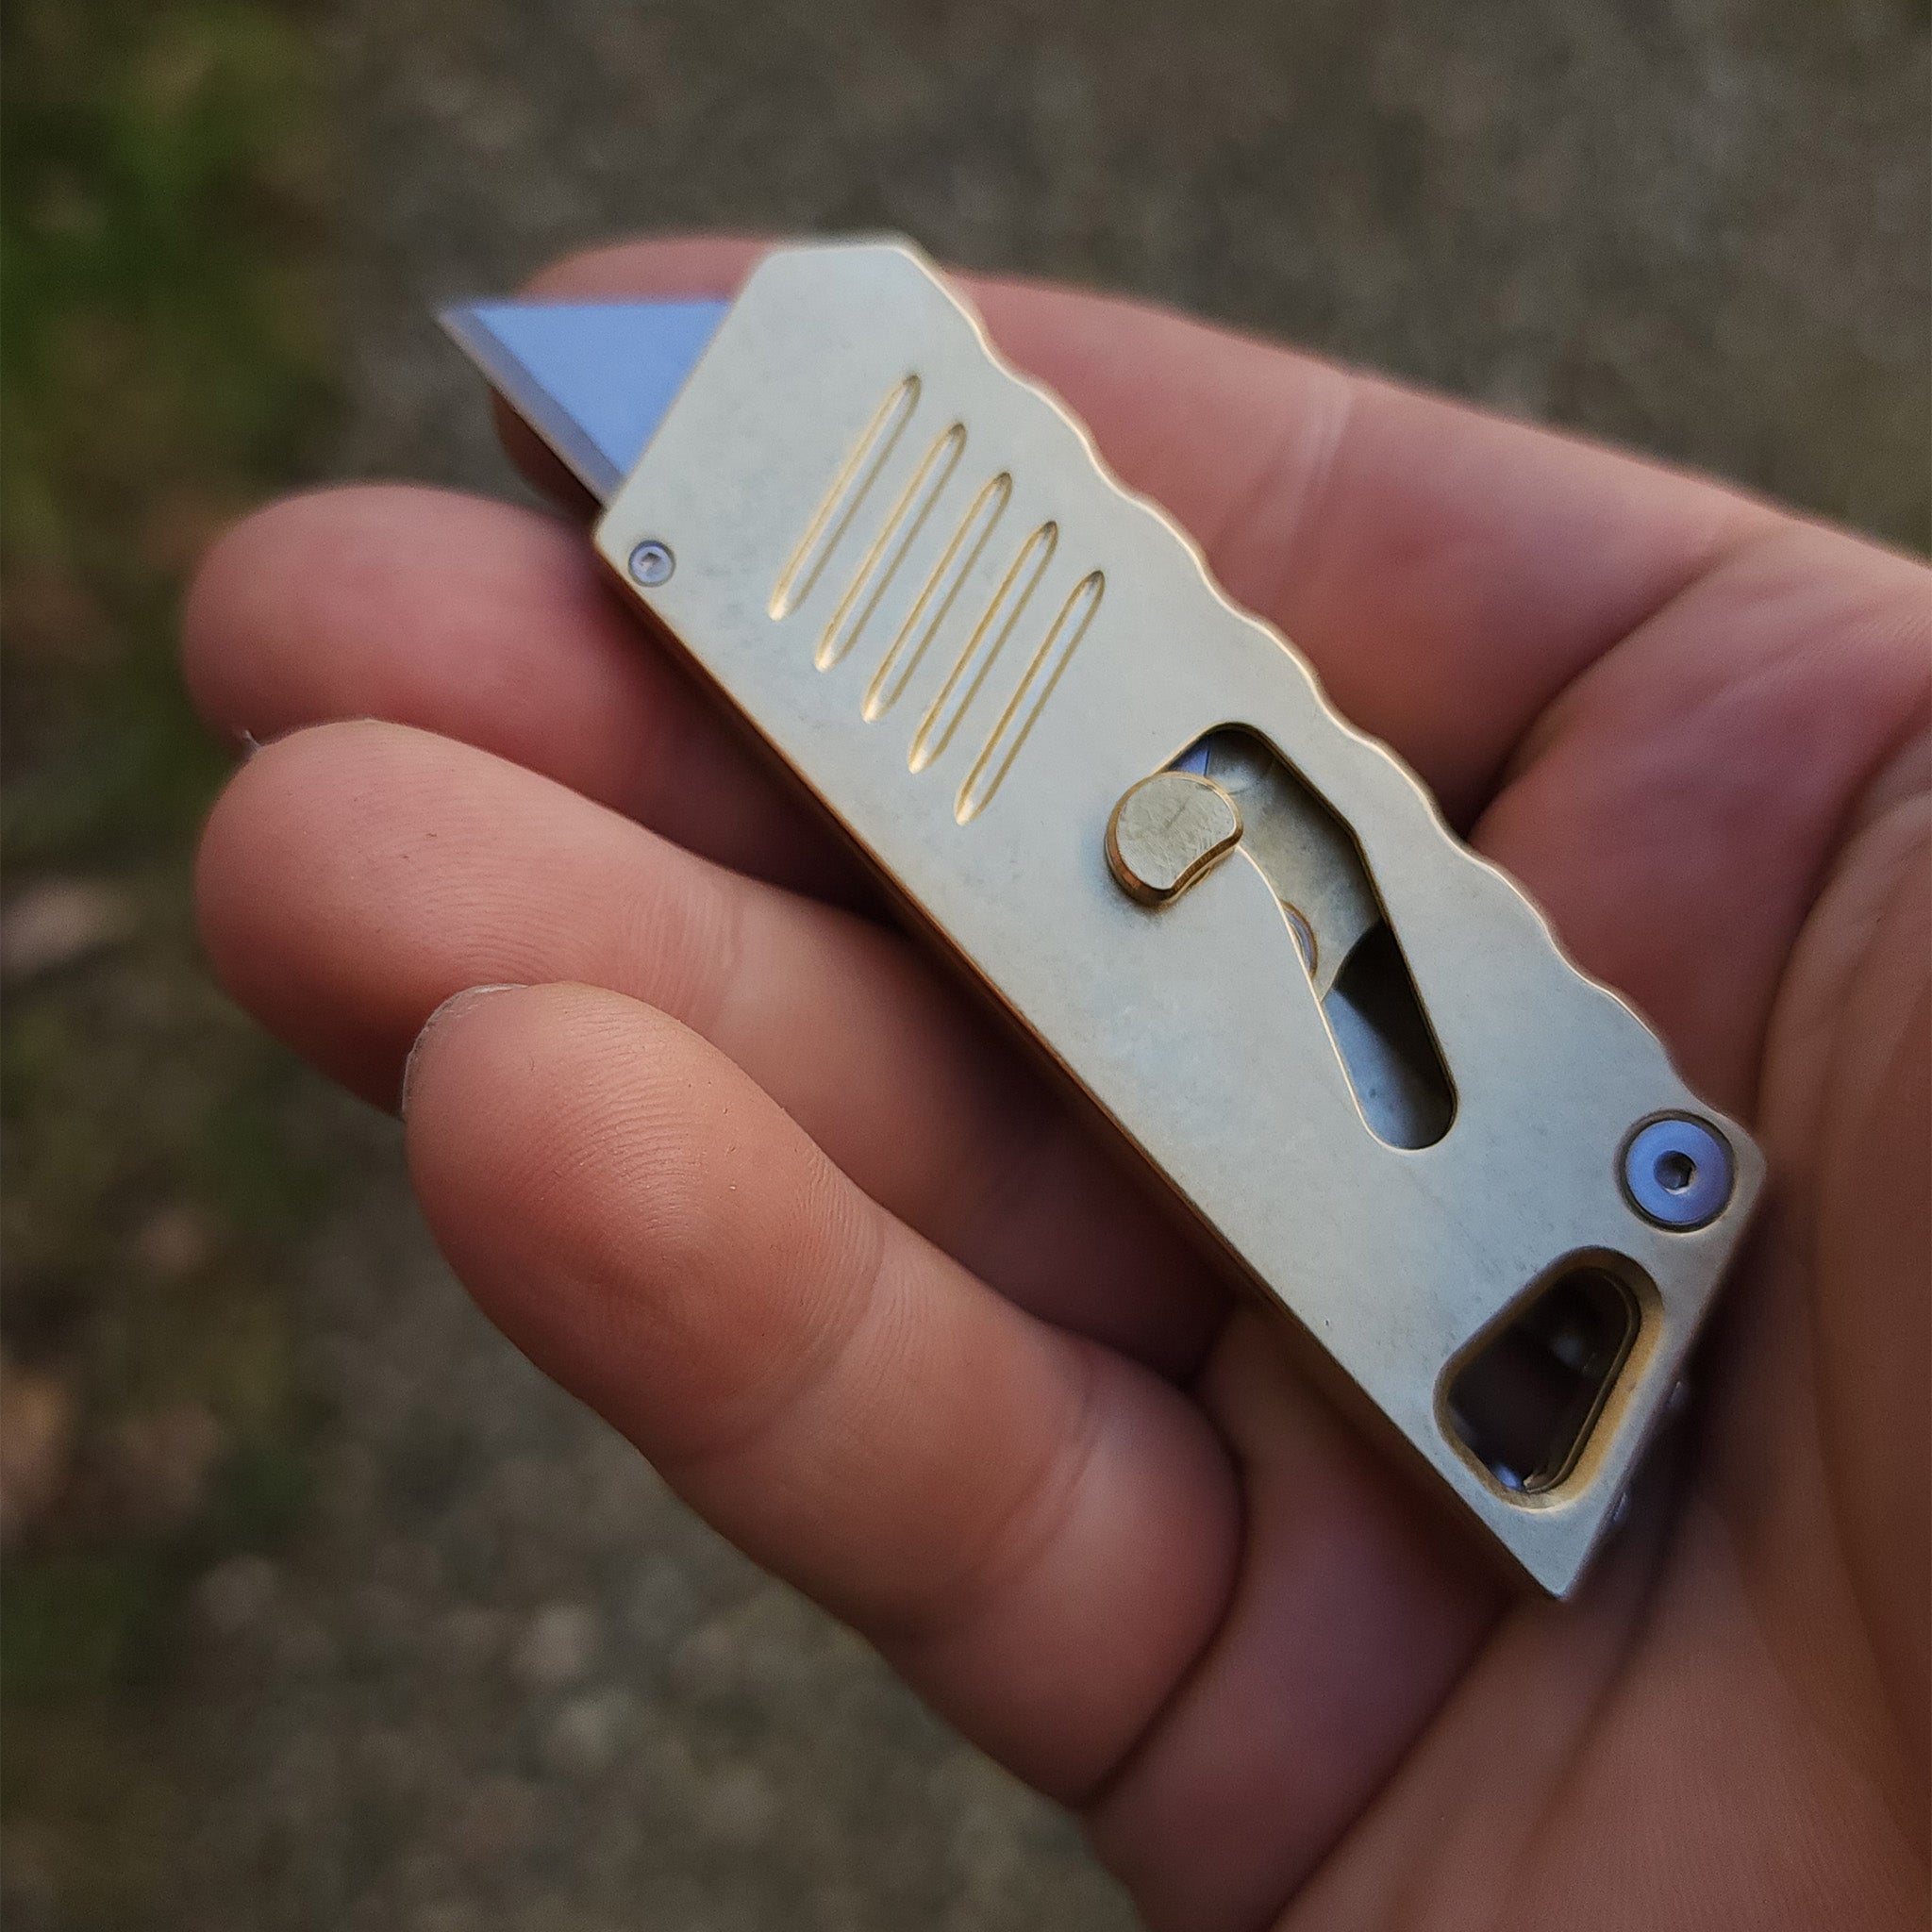 focusworks bob the boxcutter in brass held in a hand